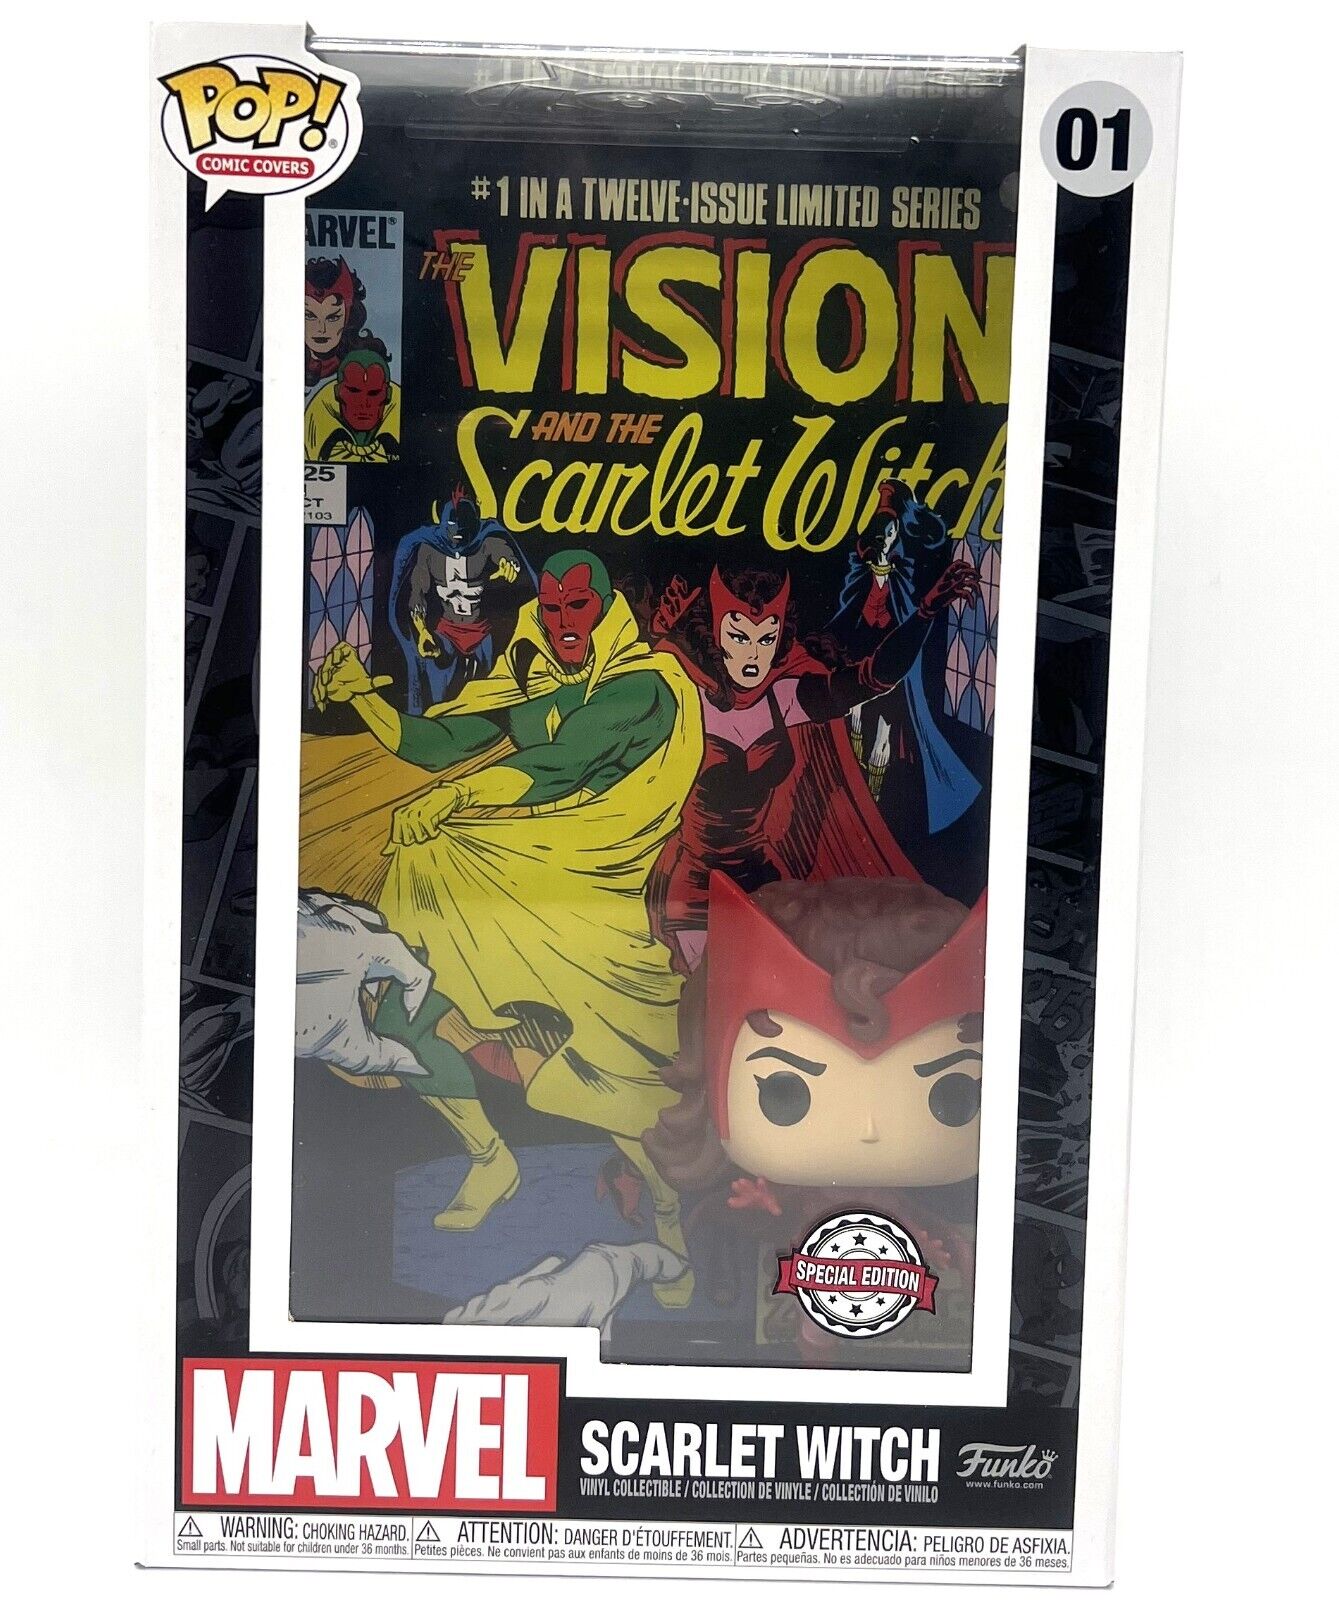 Funko Pop Comic Covers Marvel Scarlet Witch #01 Special Edition